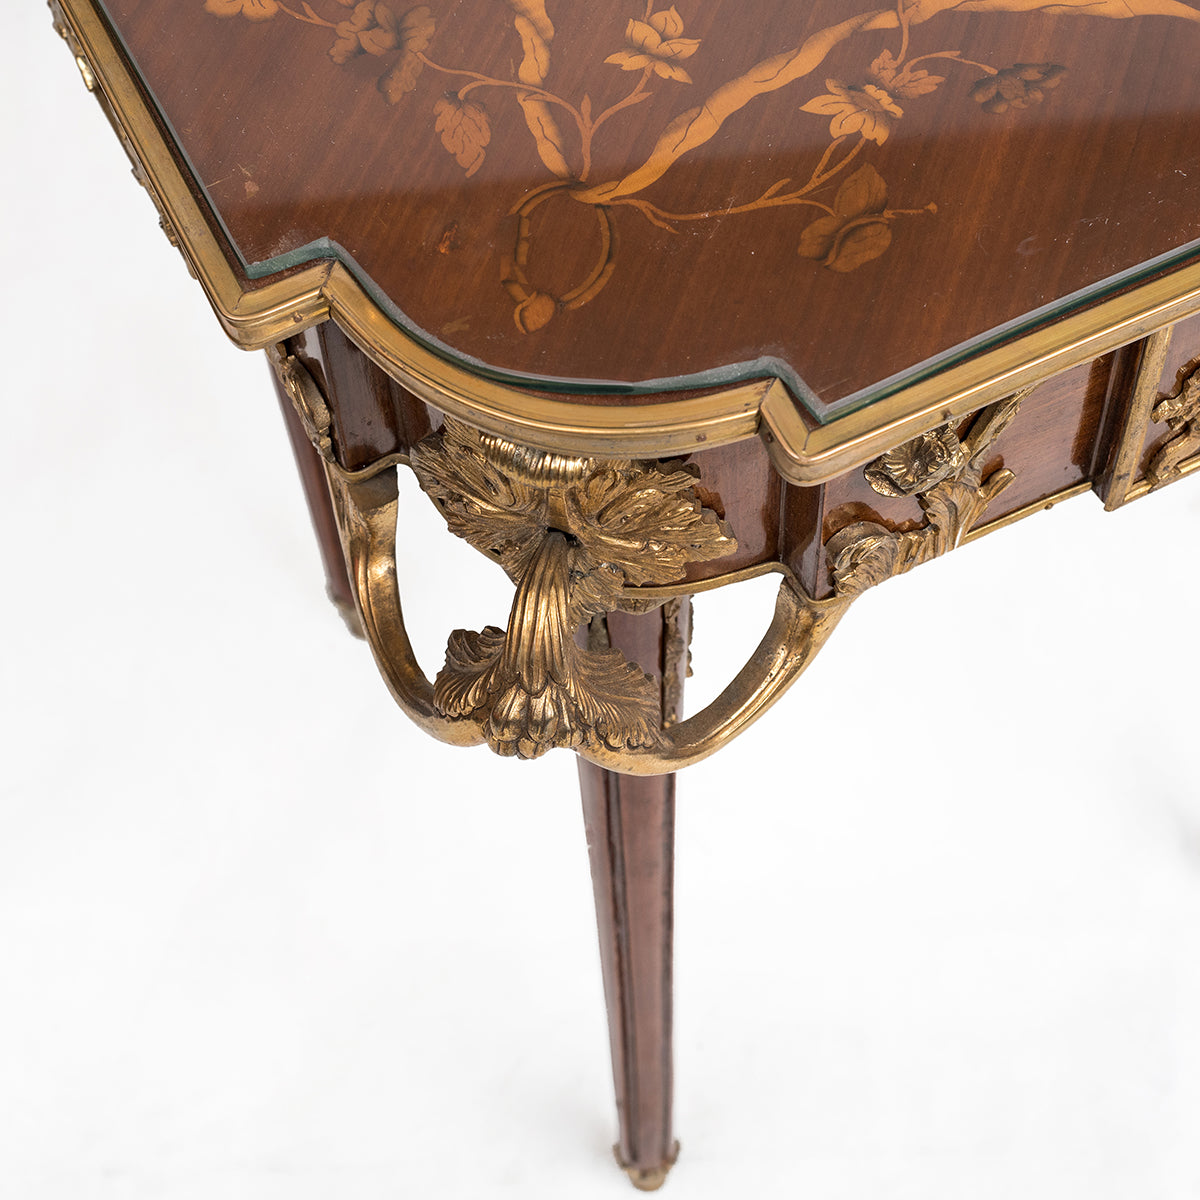 Pair of French Louis XVI style ormolu mounted side tables (2 set)